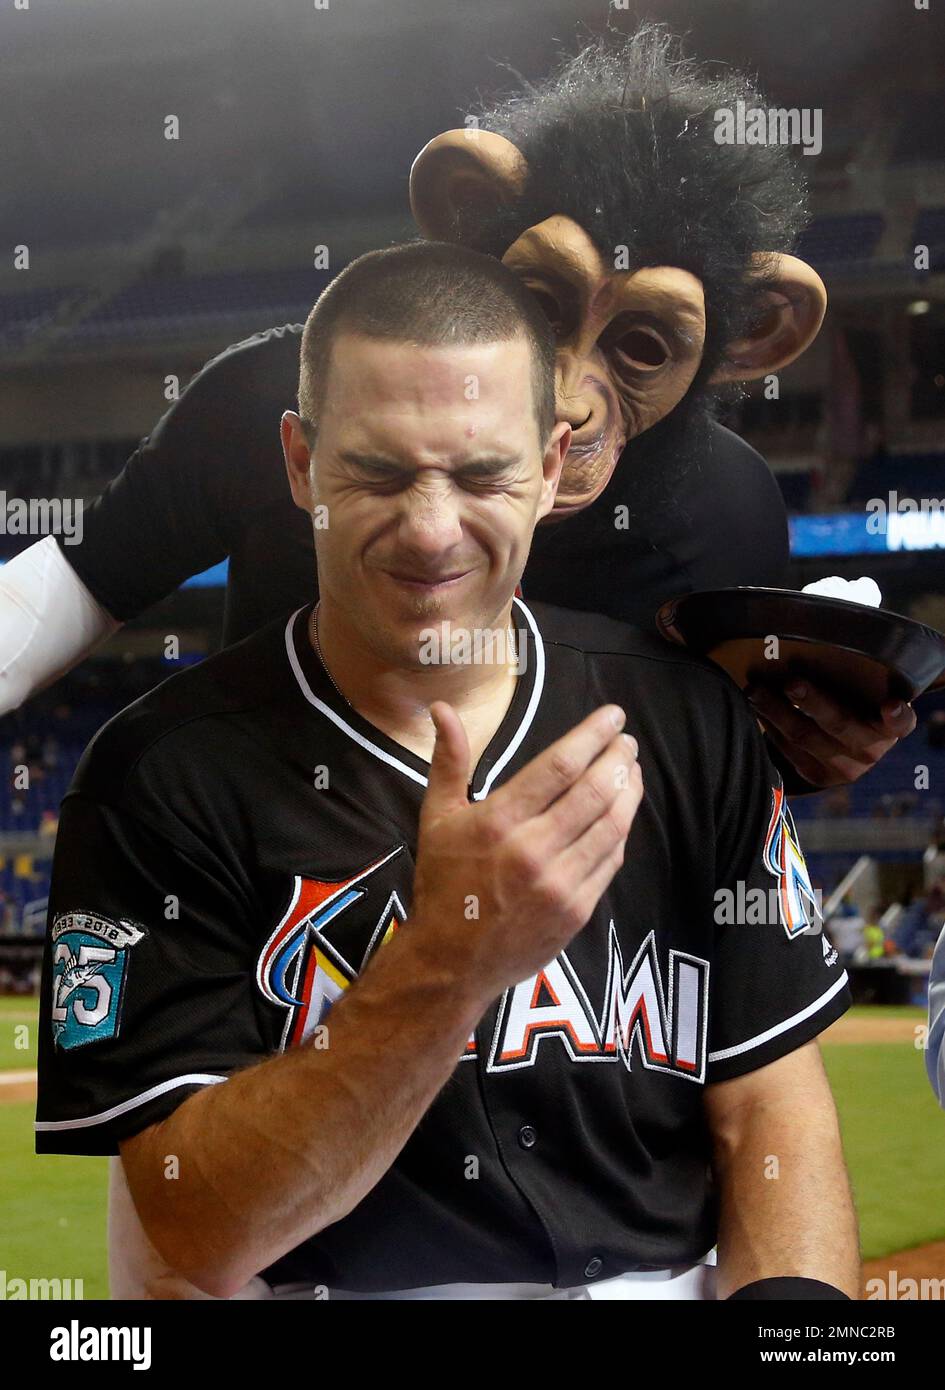 World Series fan creates buzz with Marlins jersey